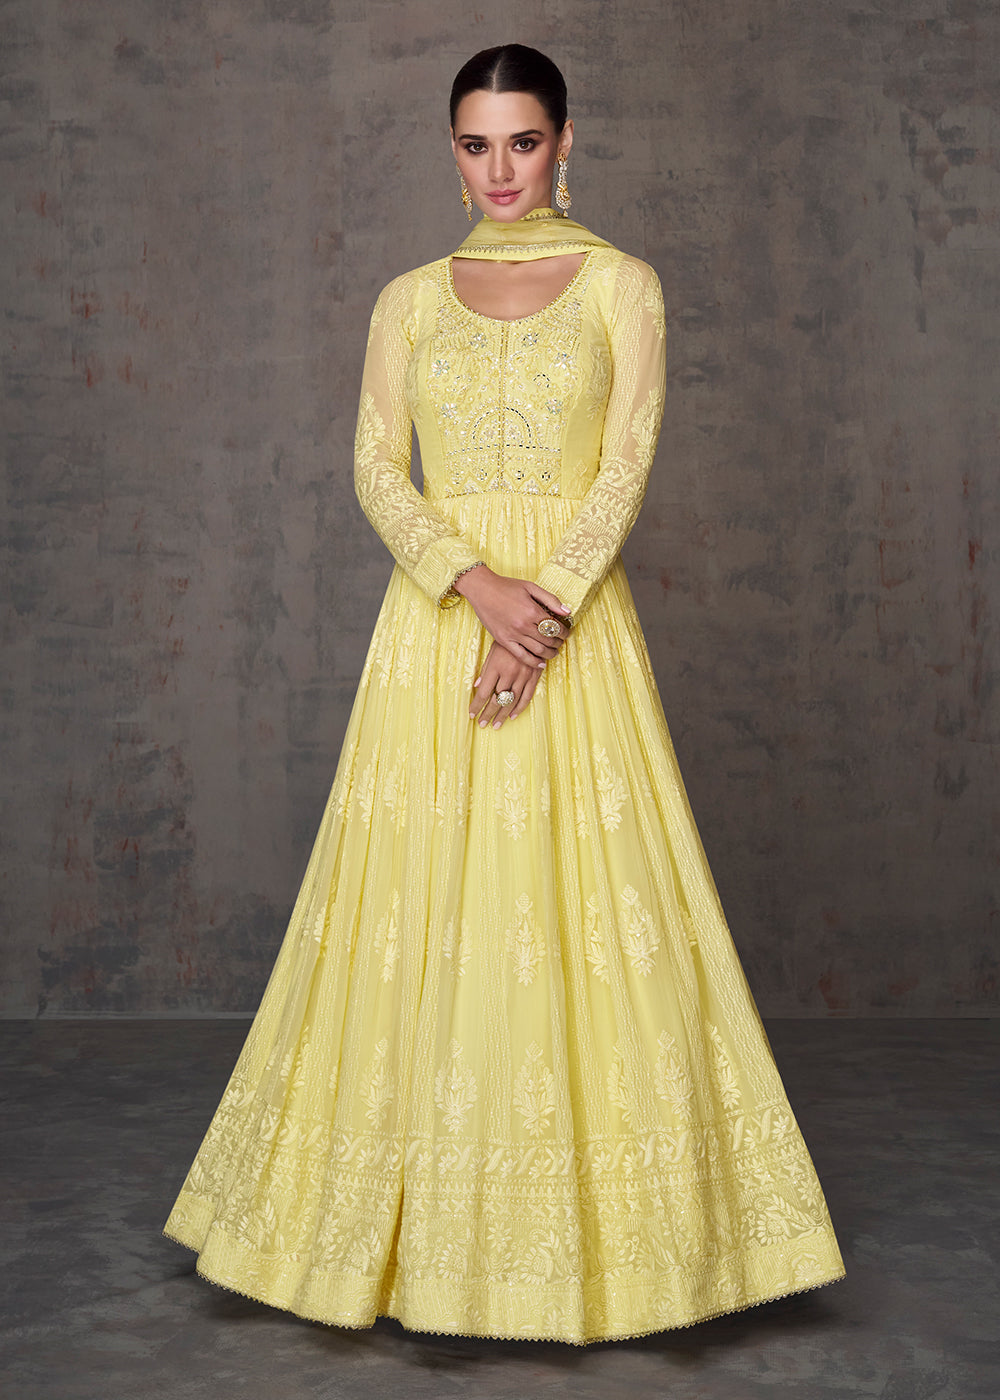 Buy Now Pretty Yellow Wedding Wear Embroidered Long Anarkali Suit Online in USA, UK, Australia, New Zealand, Canada & Worldwide at Empress Clothing.